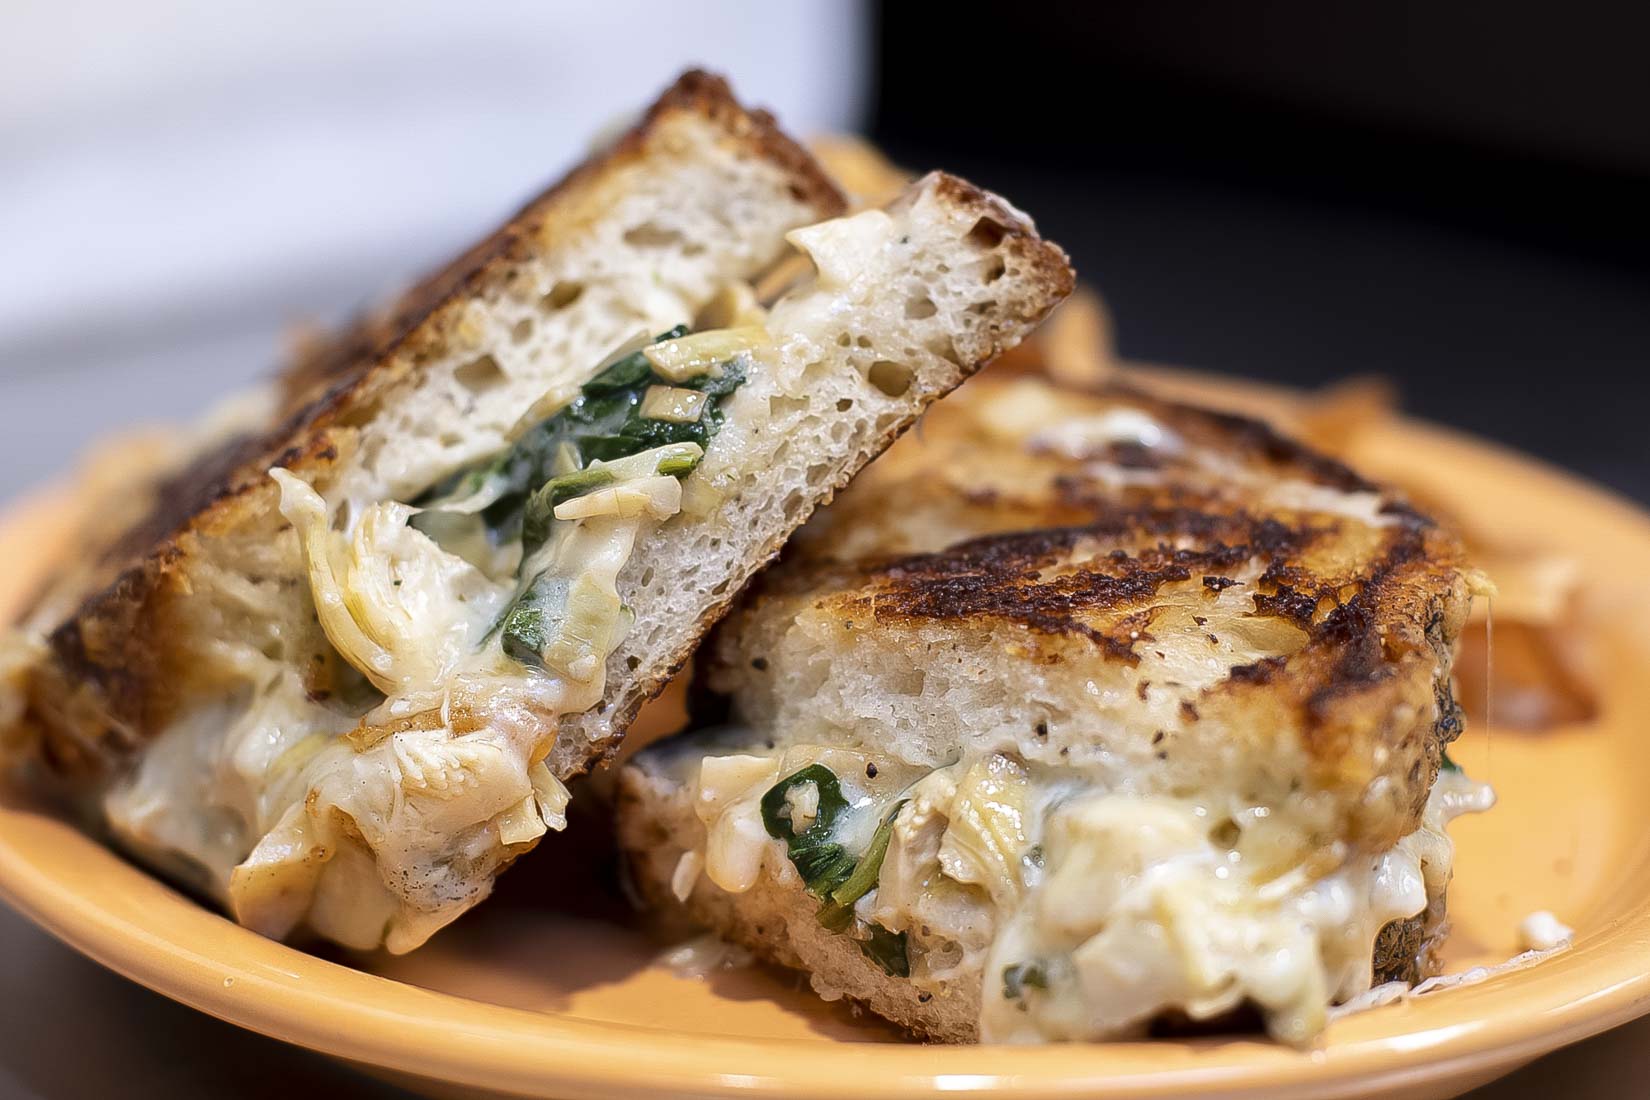 Spinach and Artichoke Grilled Cheese